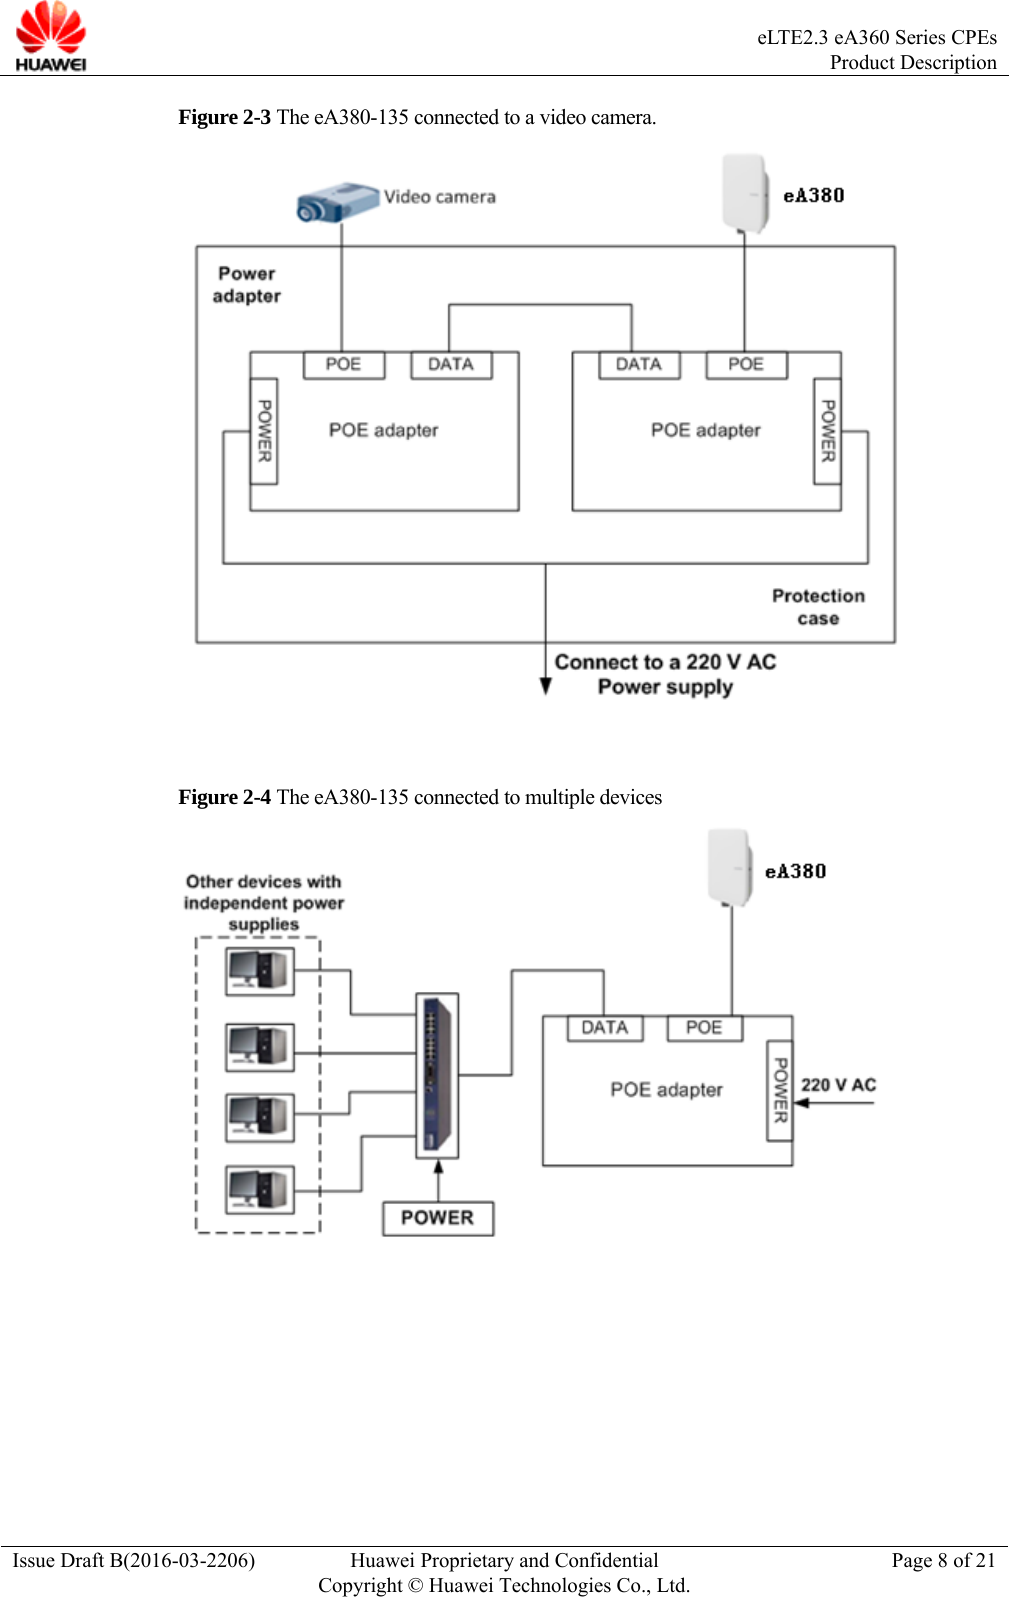  eLTE2.3 eA360 Series CPEsProduct Description Issue Draft B(2016-03-2206)  Huawei Proprietary and Confidential Copyright © Huawei Technologies Co., Ltd.Page 8 of 21 Figure 2-3 The eA380-135 connected to a video camera.   Figure 2-4 The eA380-135 connected to multiple devices  